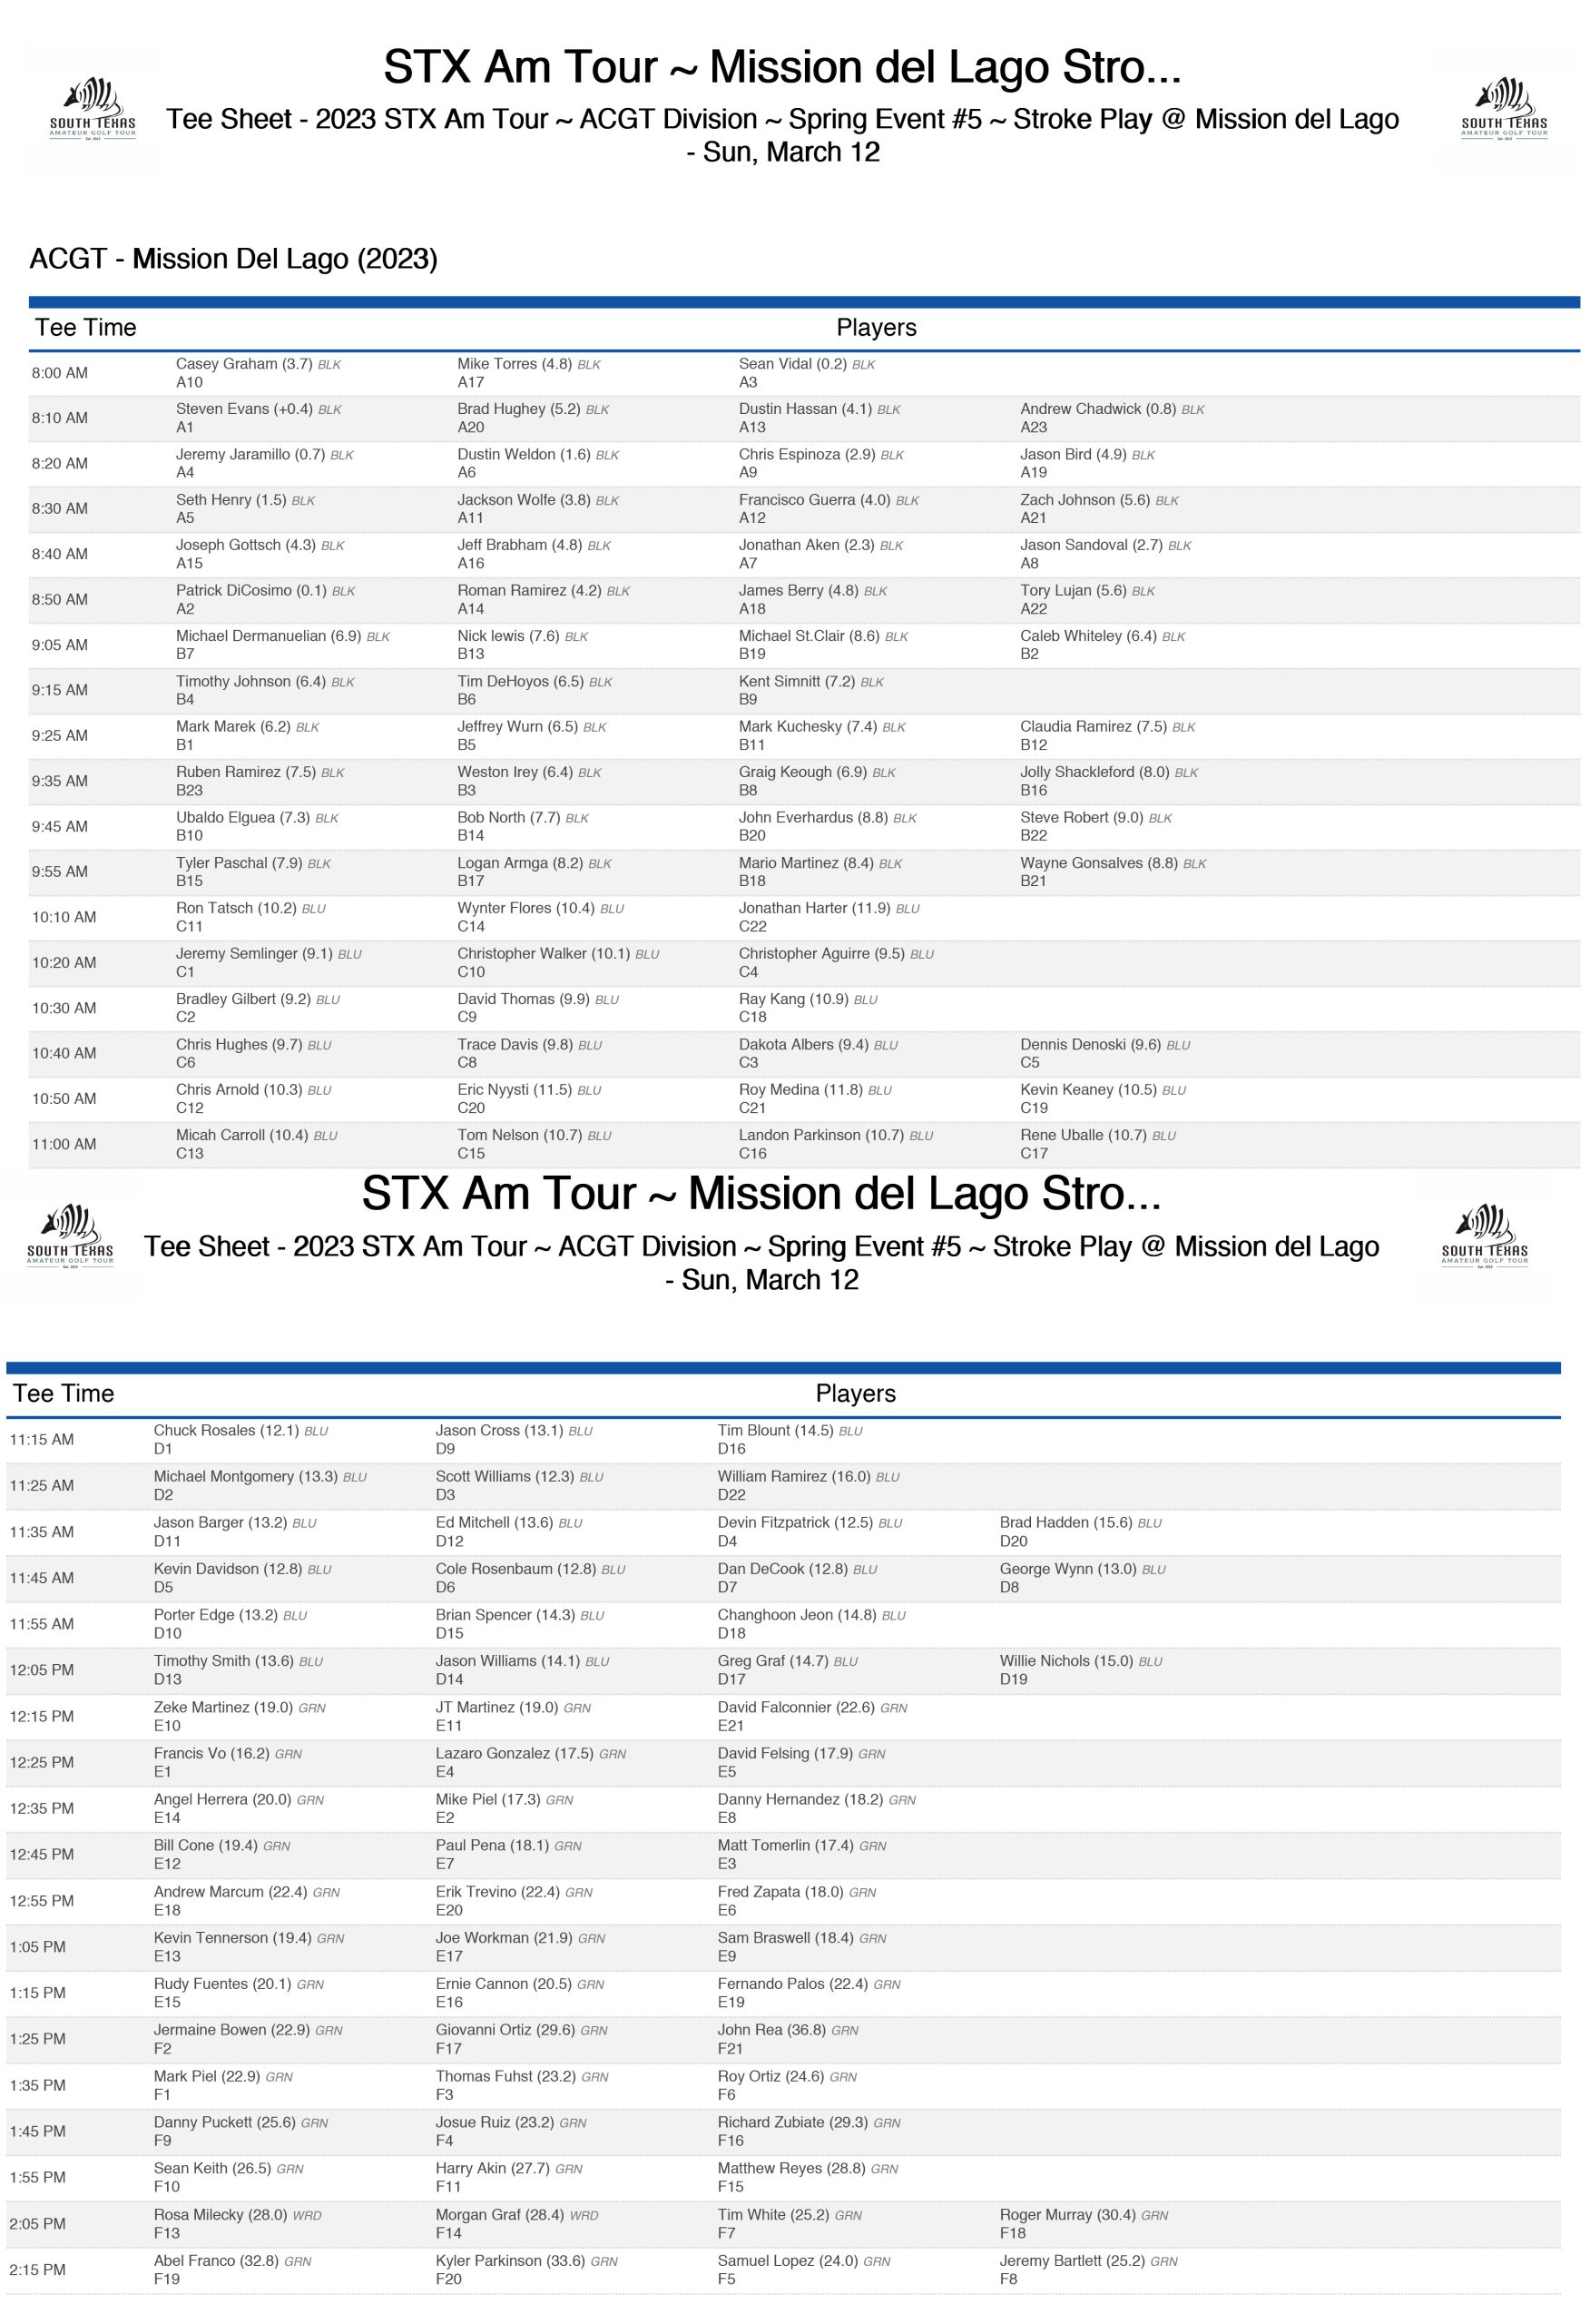 UPDATED OFFICIAL Flights & Tee Times MDL 3-12-23-1